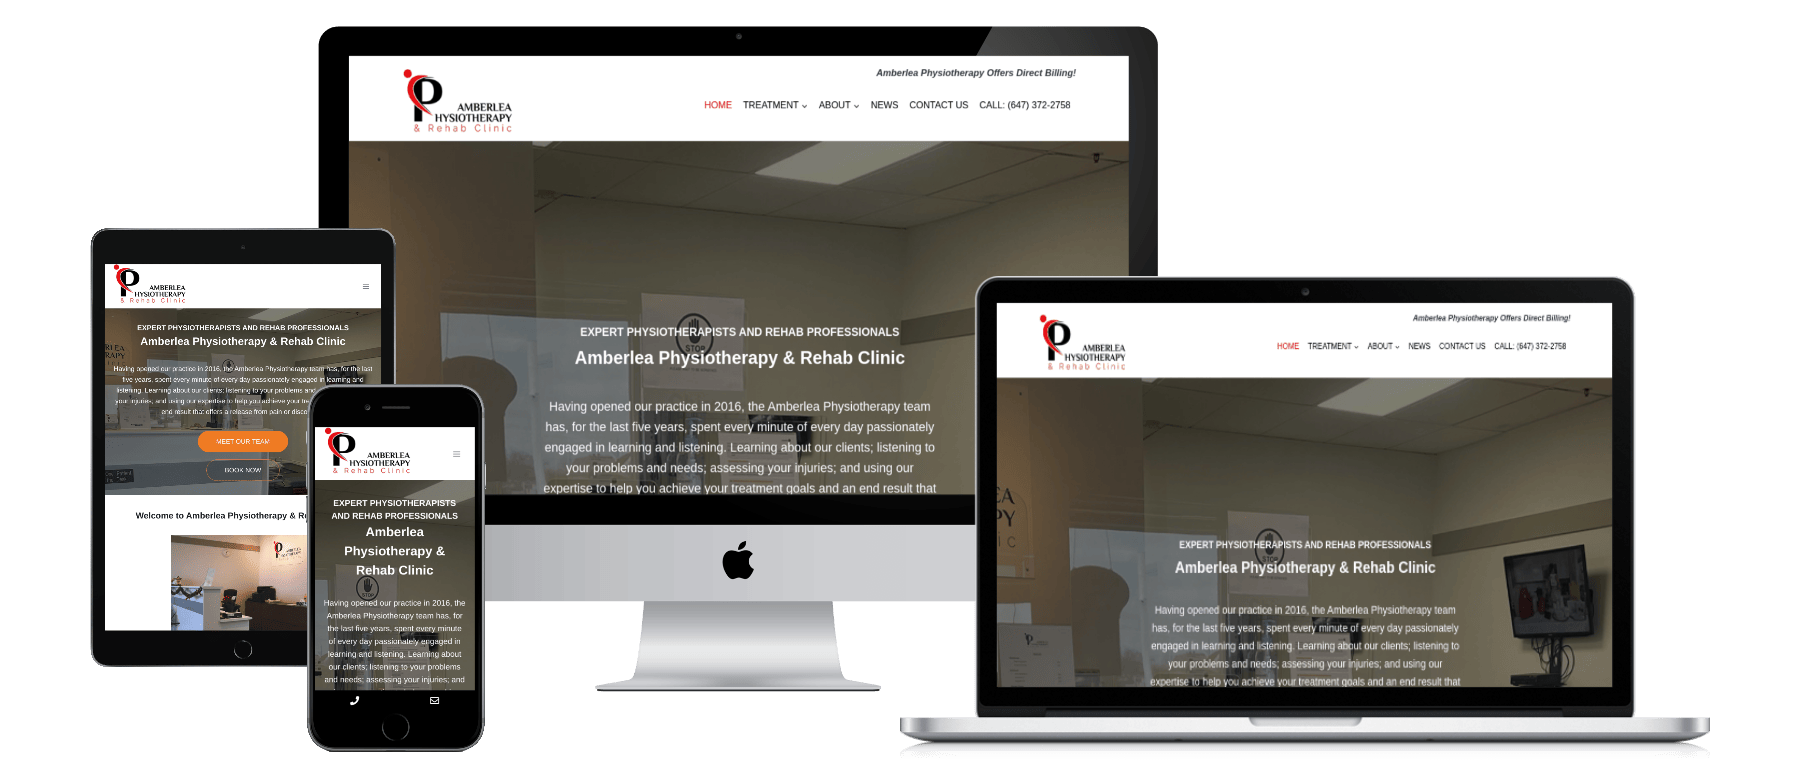 Amberlea Physiotherapy & Rehab Clinic website displayed on multiple devices